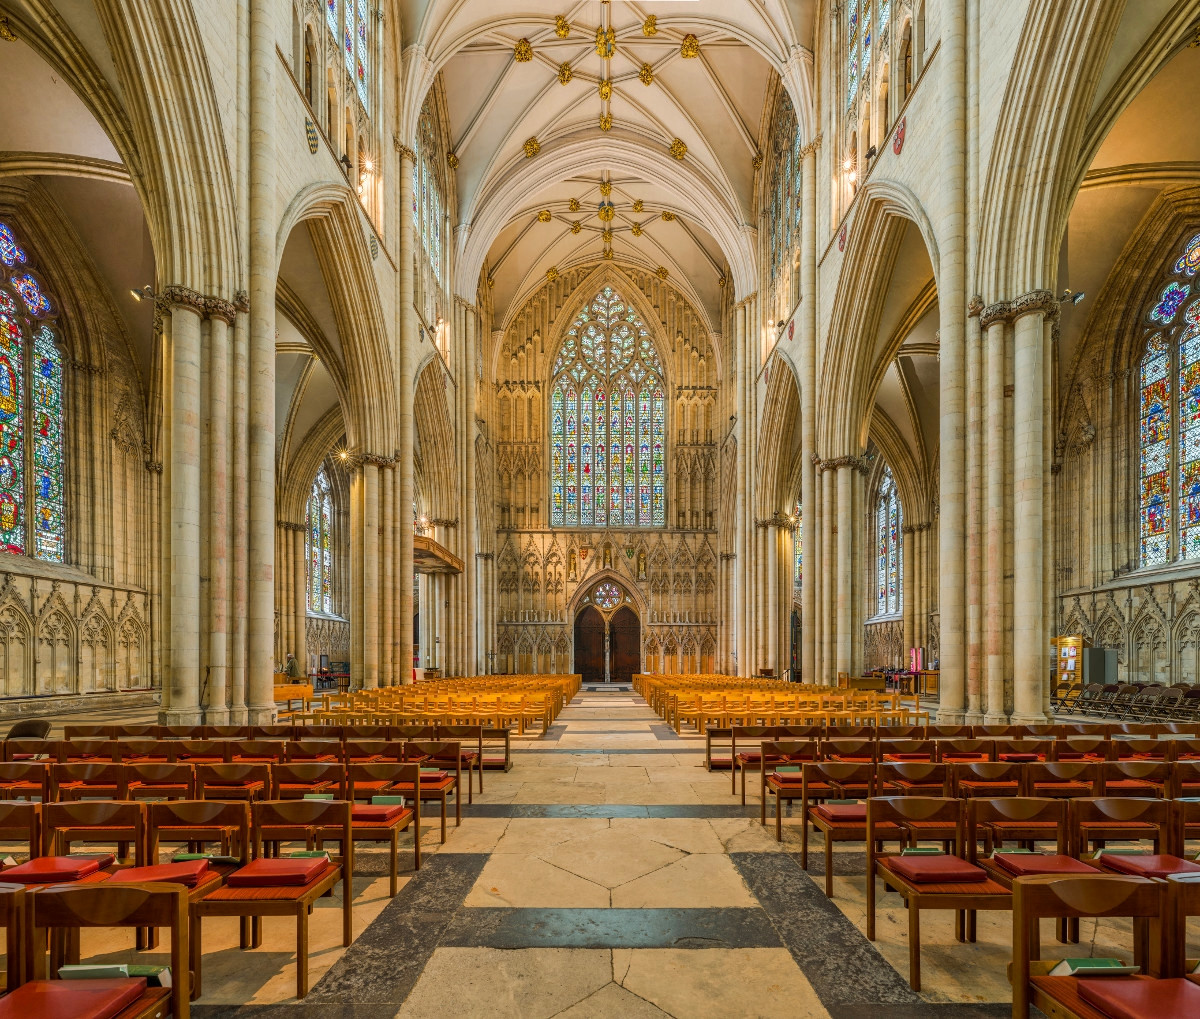 The nave of York Minster looking towards the West Window. Credit David Iliff